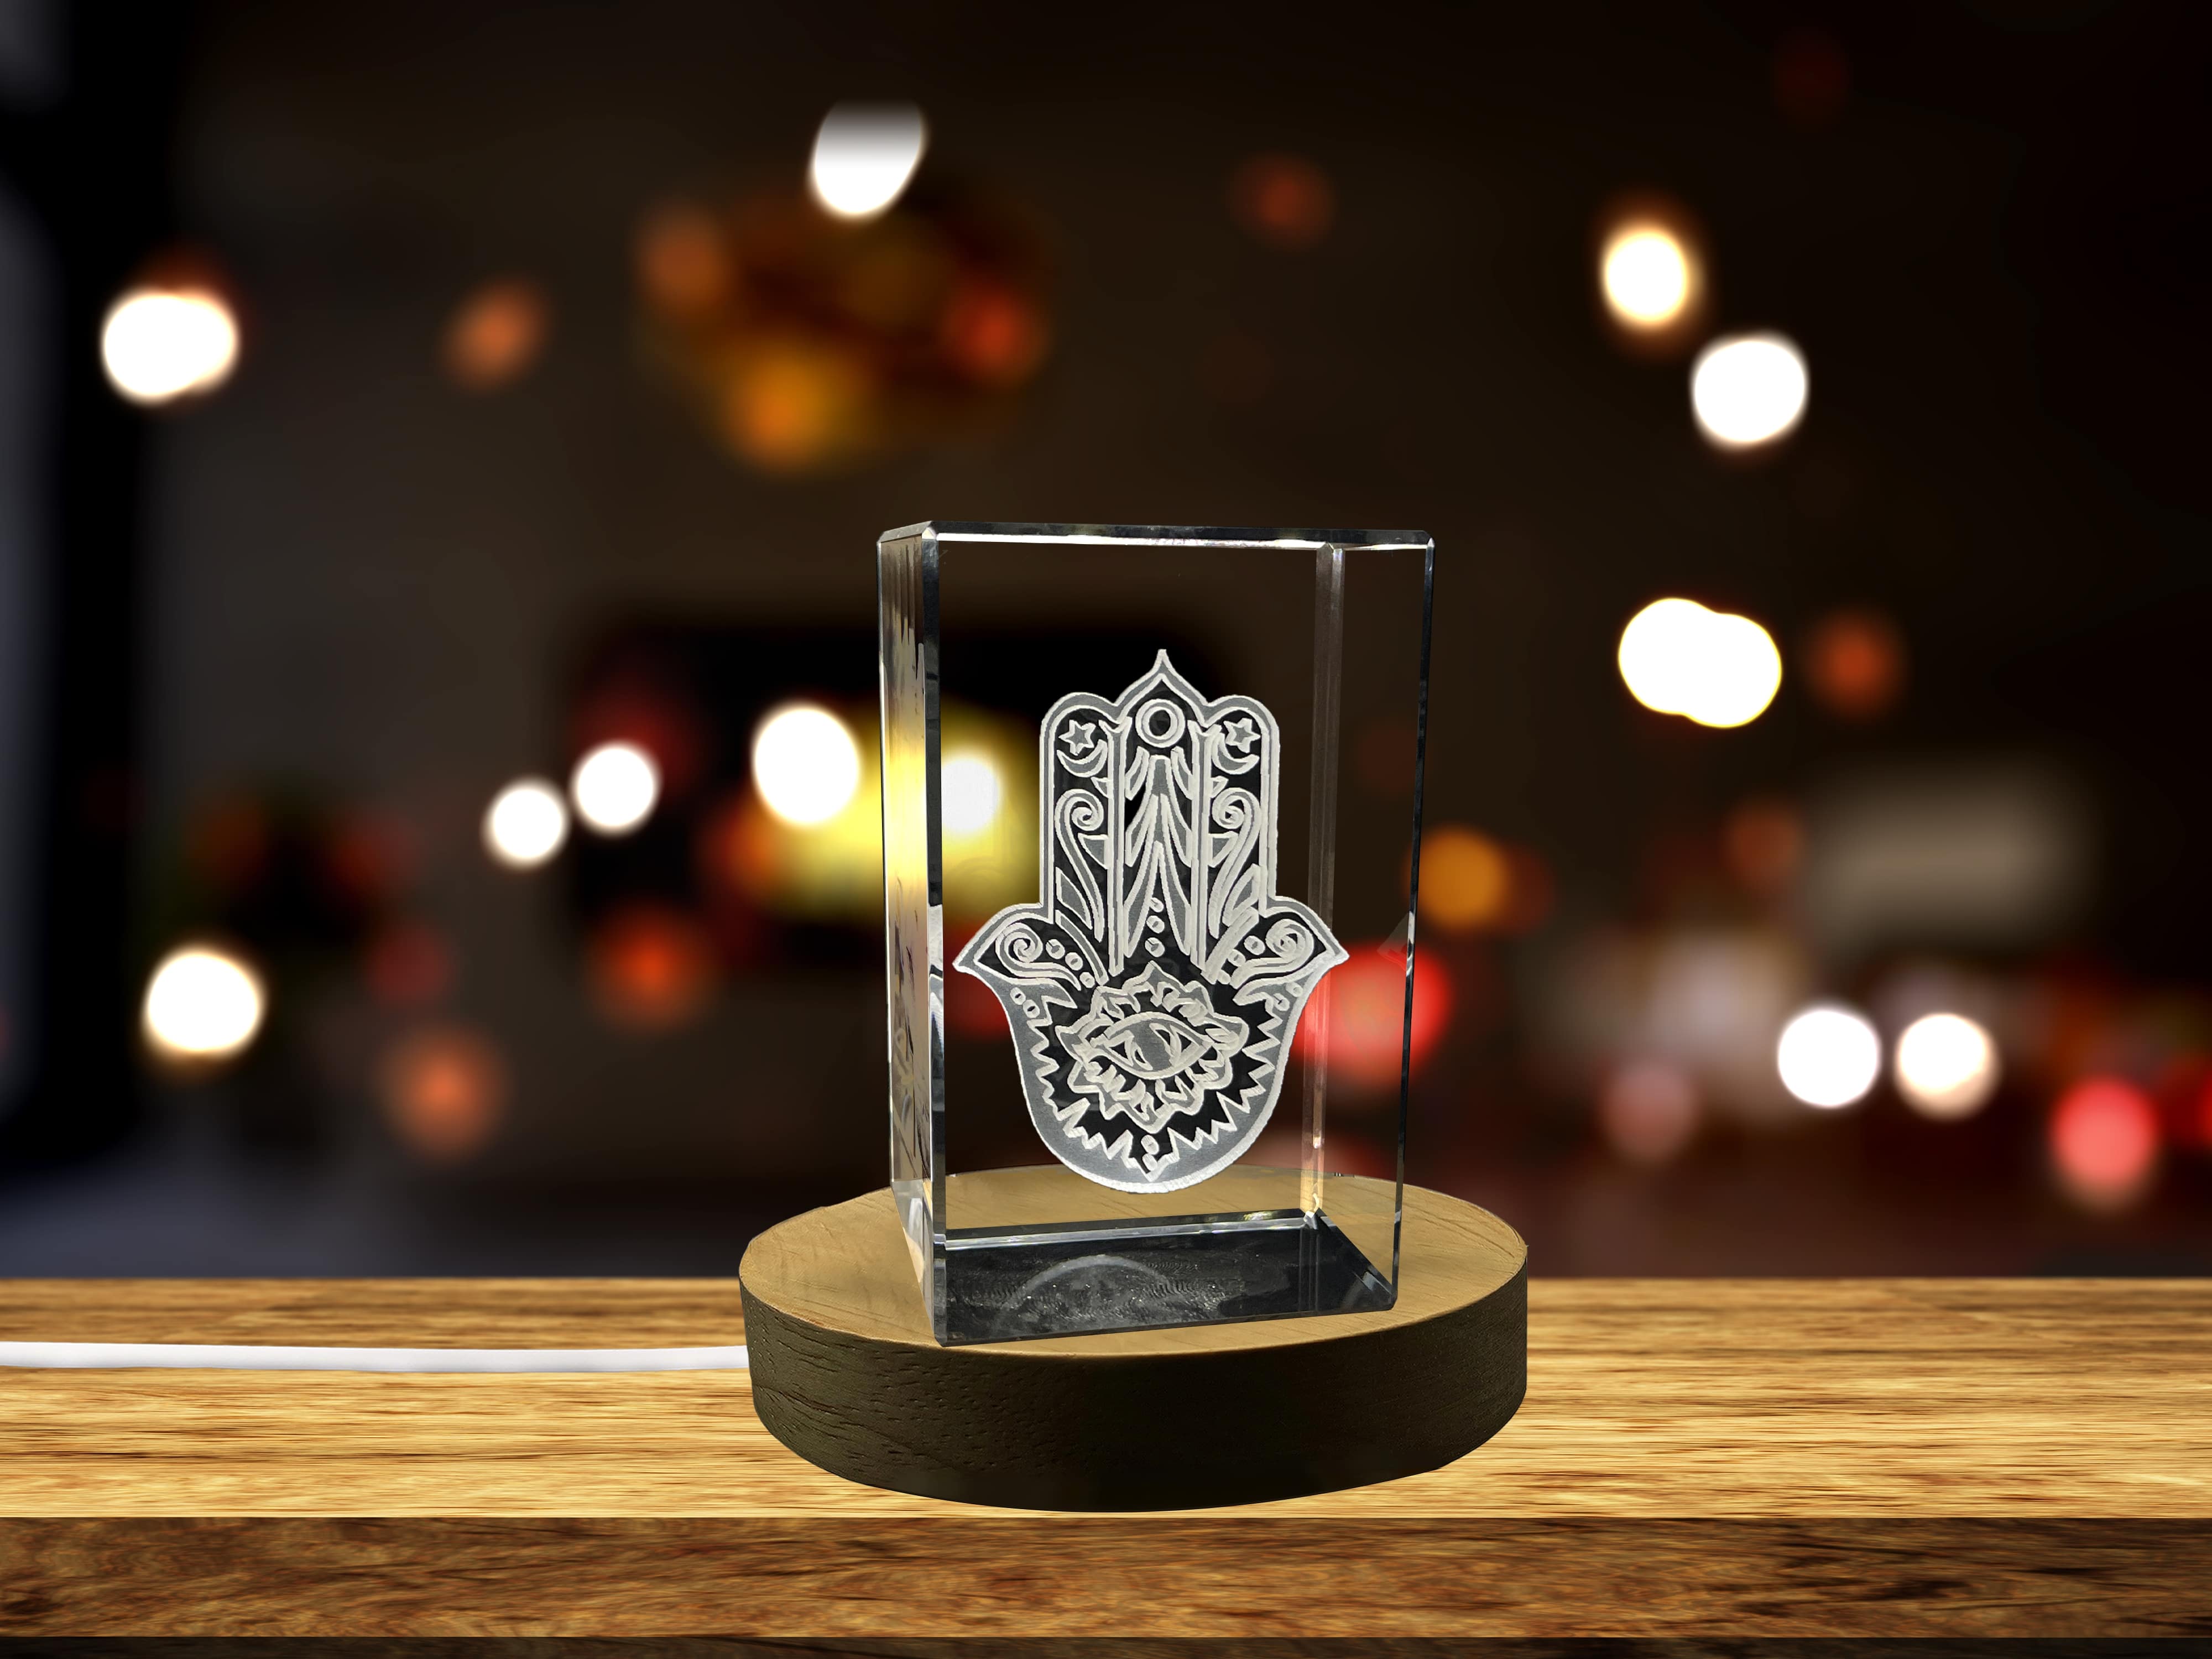 Khomsa| 3D Engraved Crystal Keepsake | Gift/Decor| Collectible | Souvenir | personalized 3D crystal photo gift |Customized 3d photo Engraved Crystal | Home decor A&B Crystal Collection